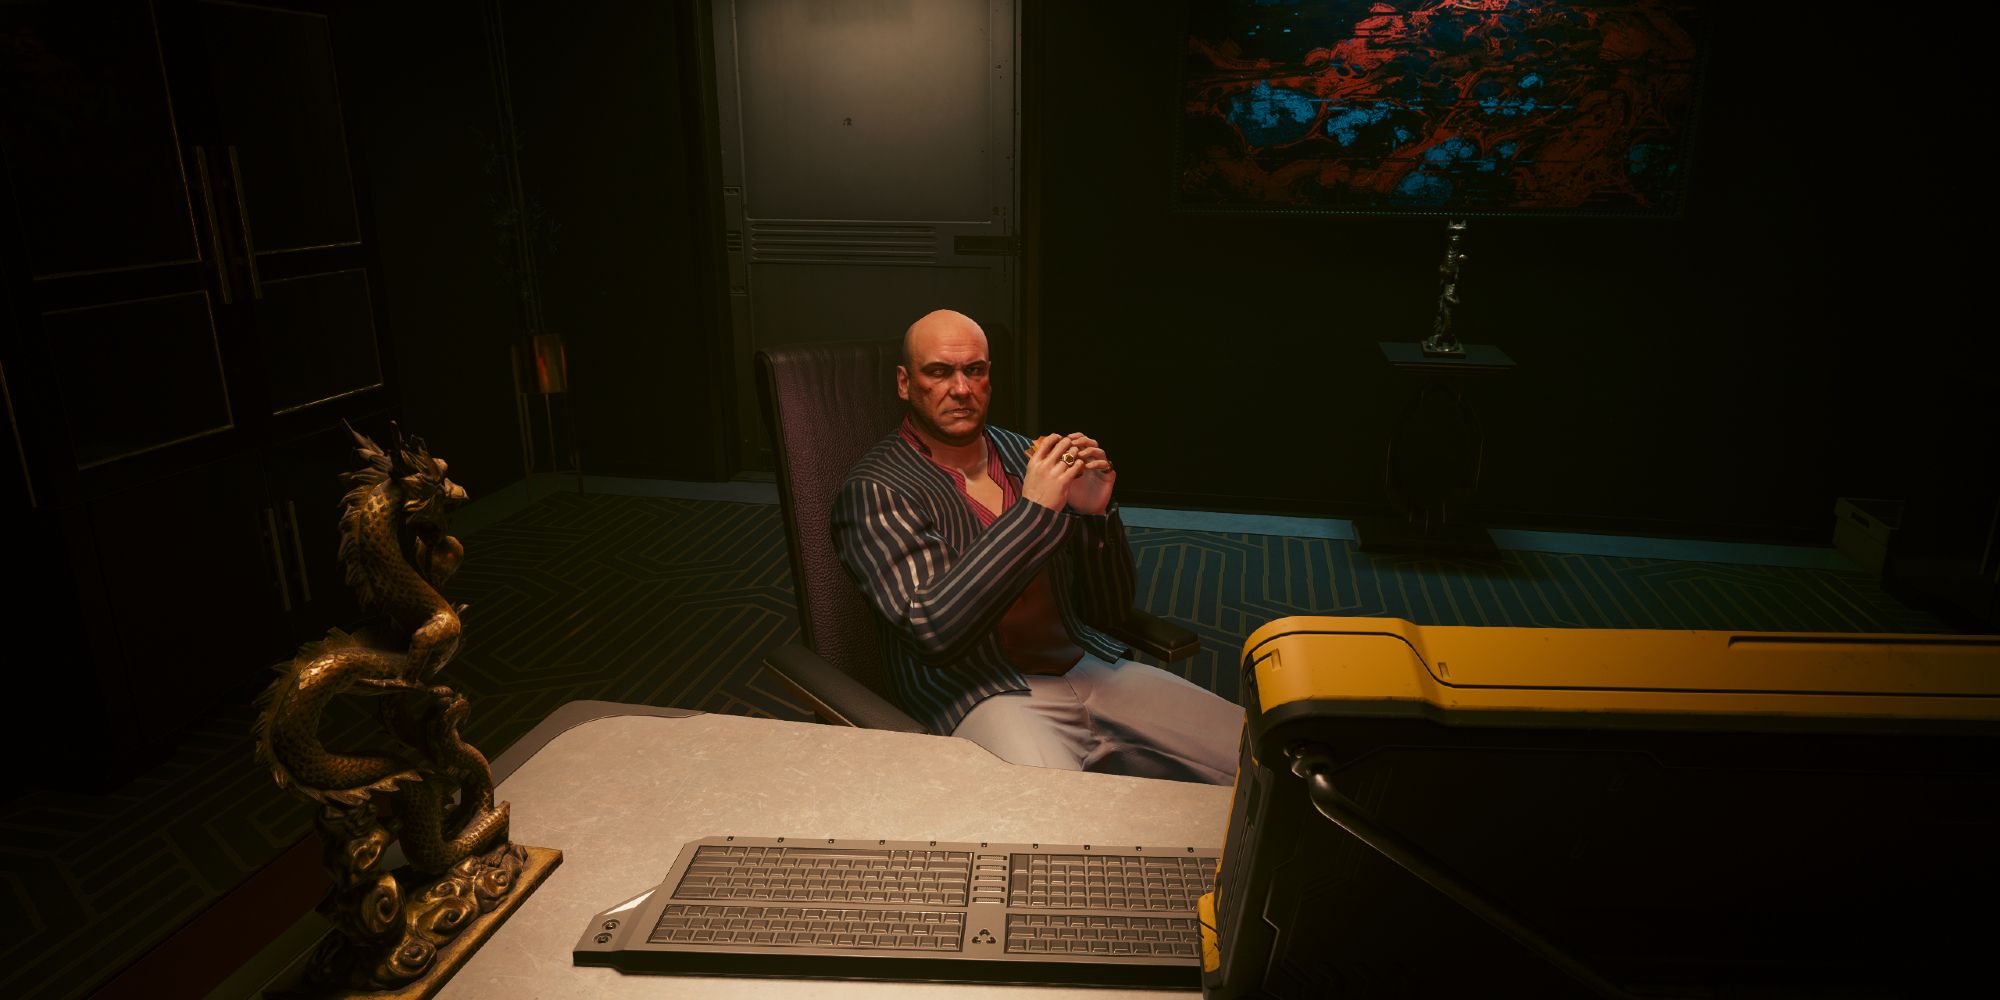 Woodman eating a burger at his desk in Cyberpunk 2077.